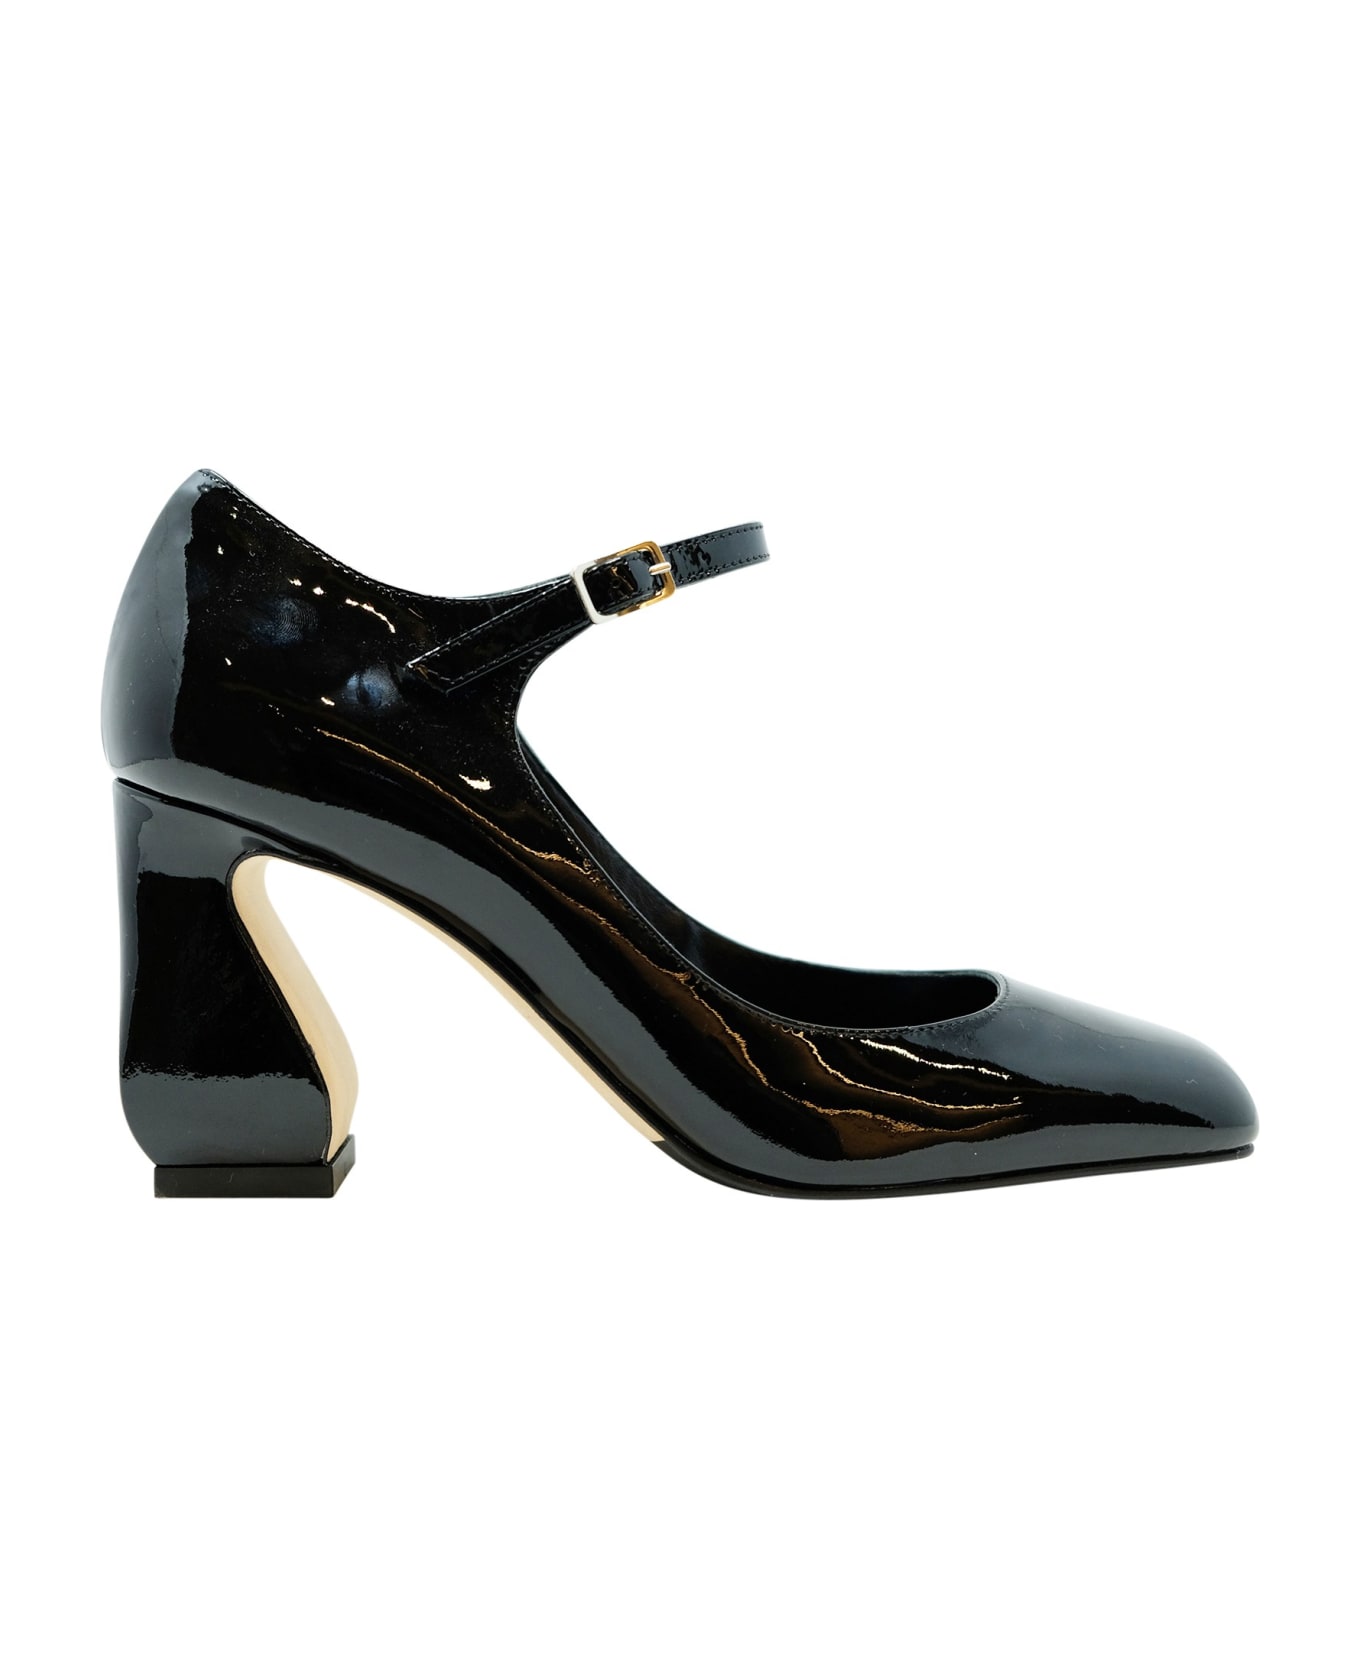 SI Rossi Black Patent Leather Pumps ハイヒール